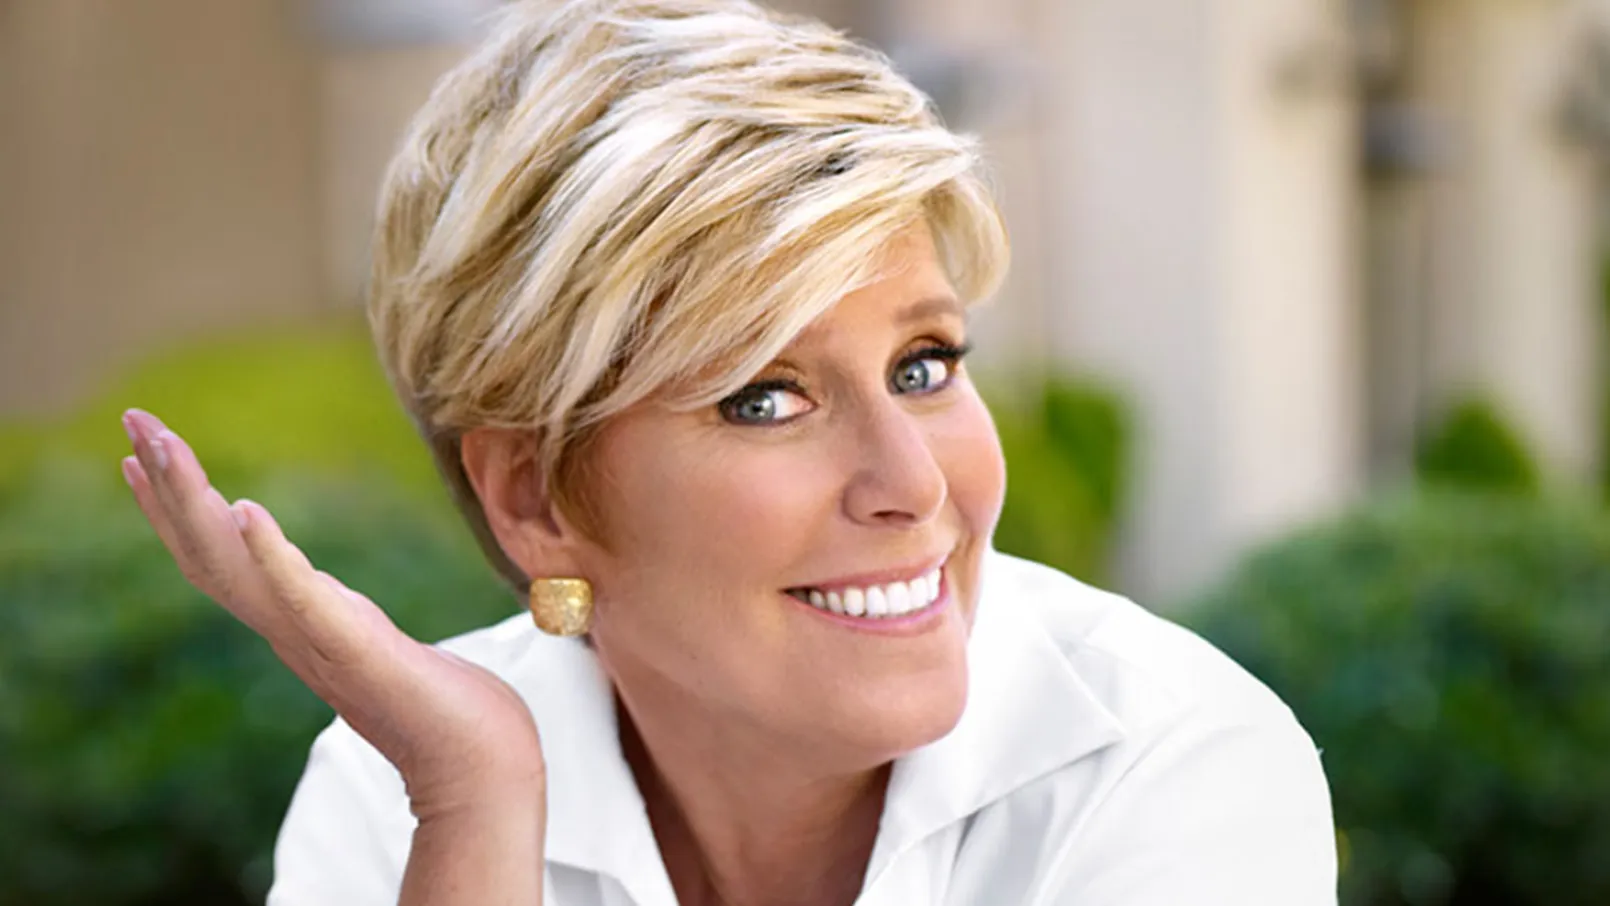 2018 Best Life Insurance Suze Orman.png